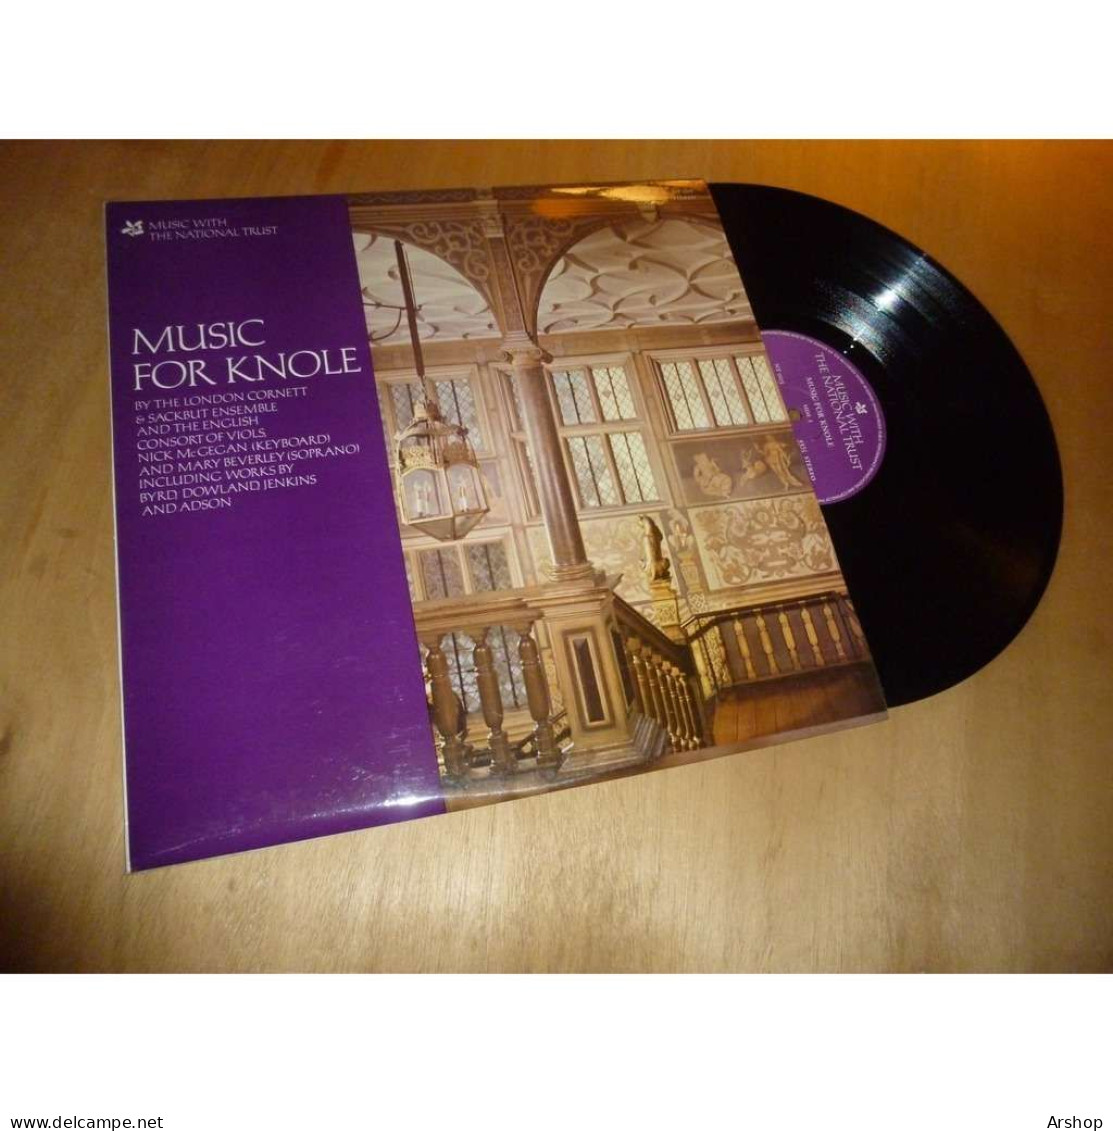 LONDON CORNETT & SACKBUT ENSEMBLE - MARY BEVERLEY Music For Knole MUSIC WITH THE NATIONAL TRUST - UK 1977 - Classique